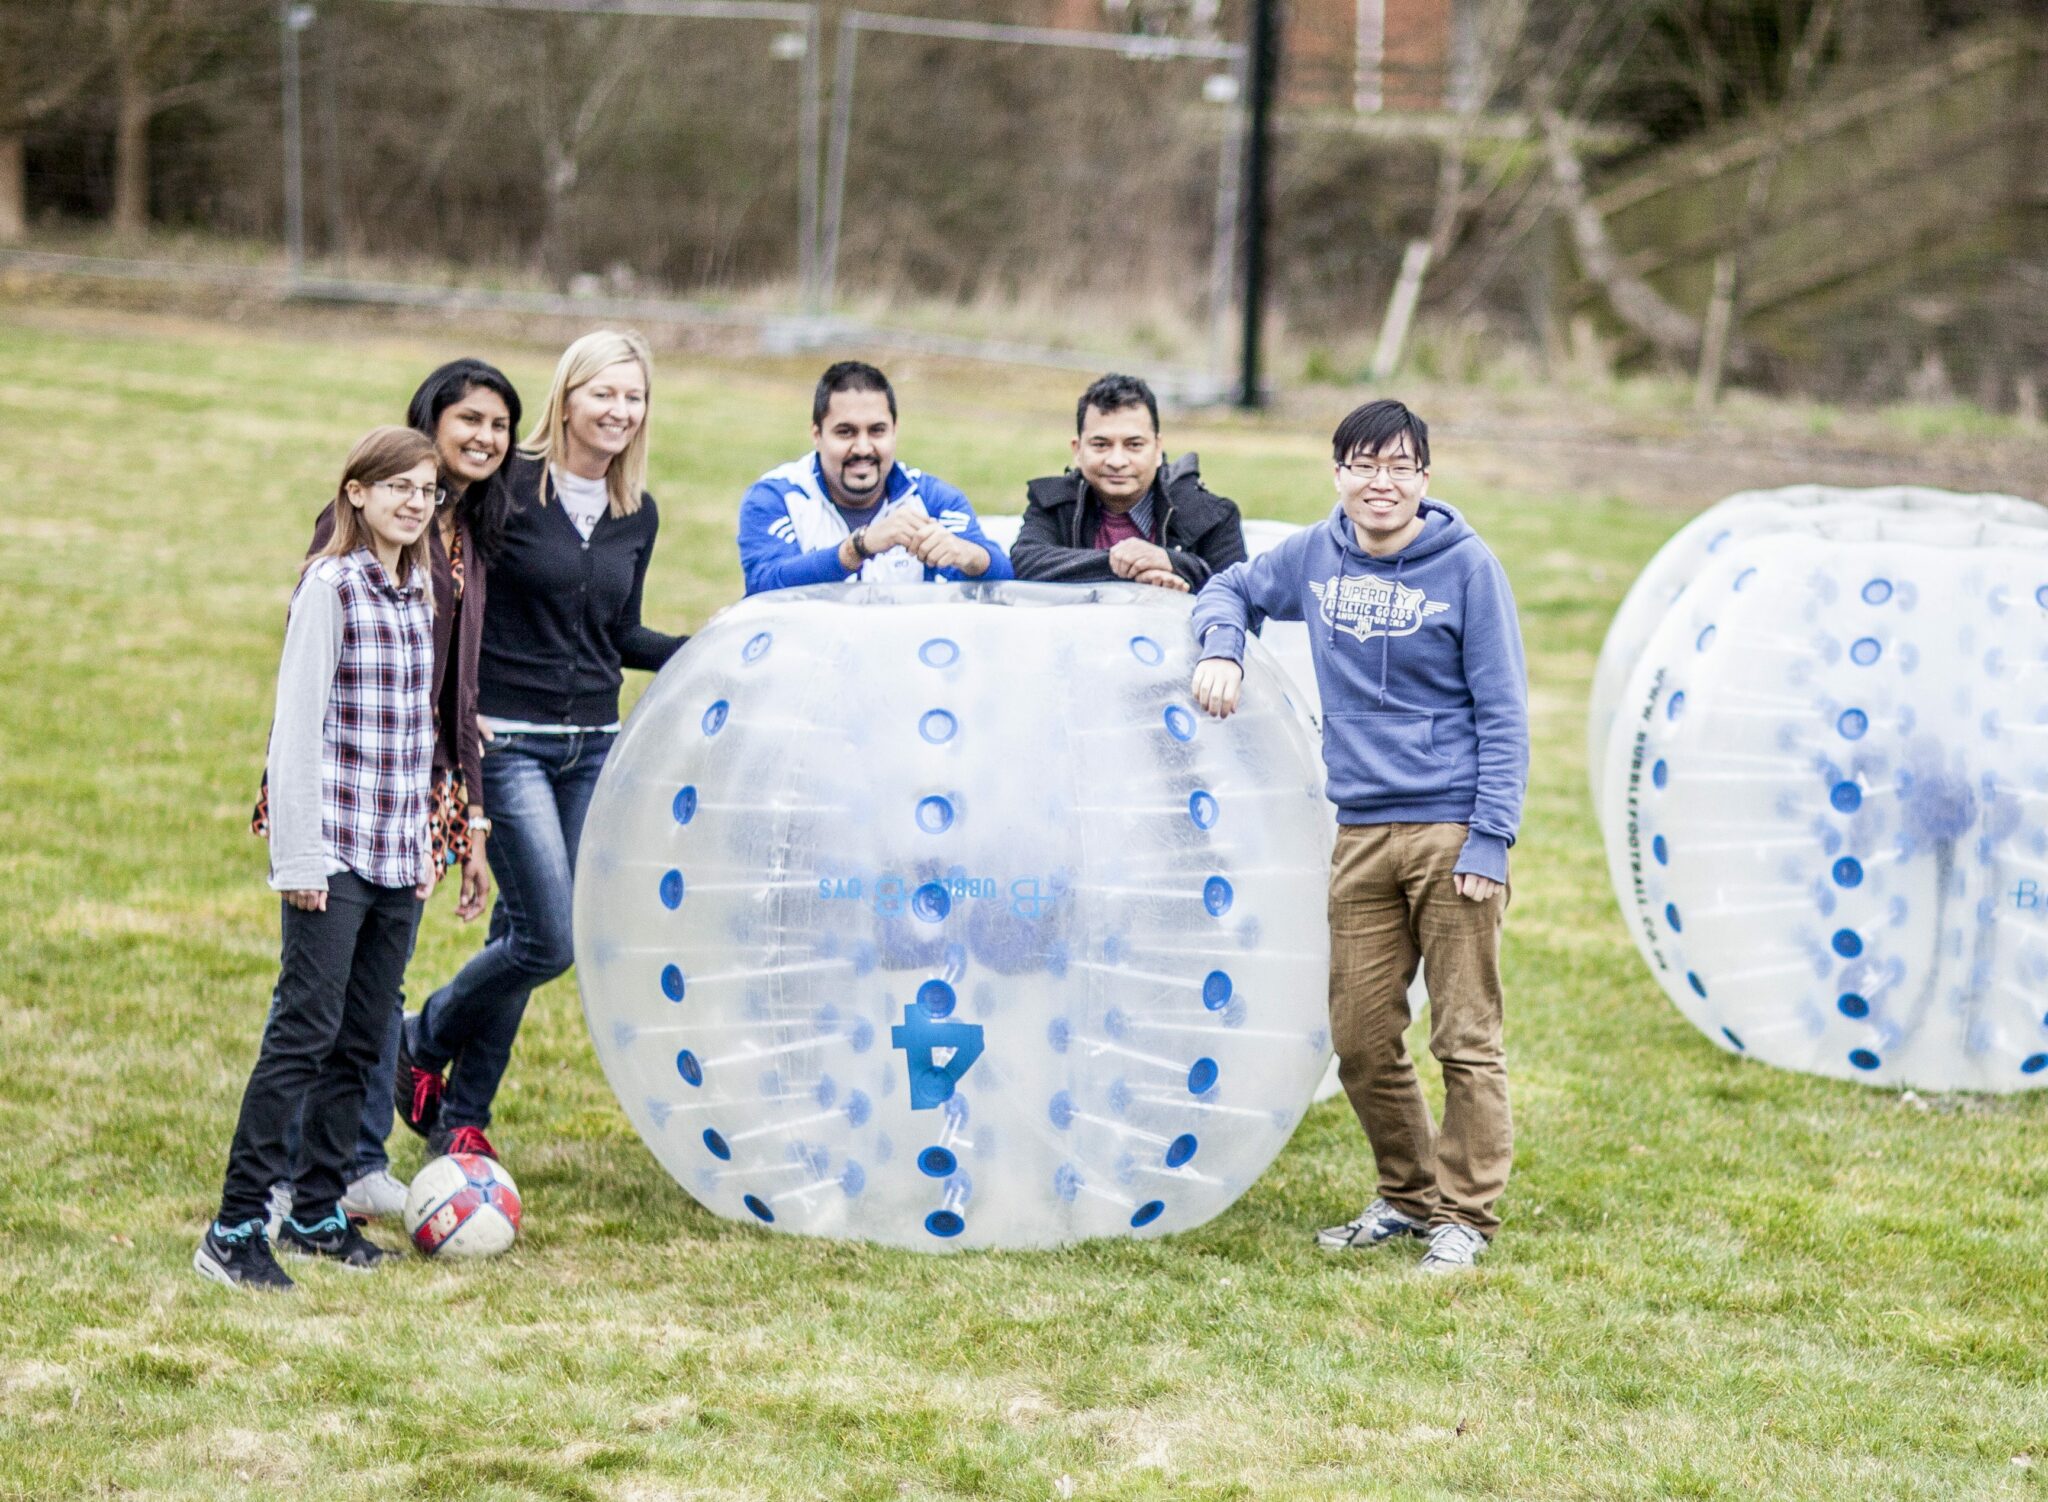 Bubble Football Event Group Photo